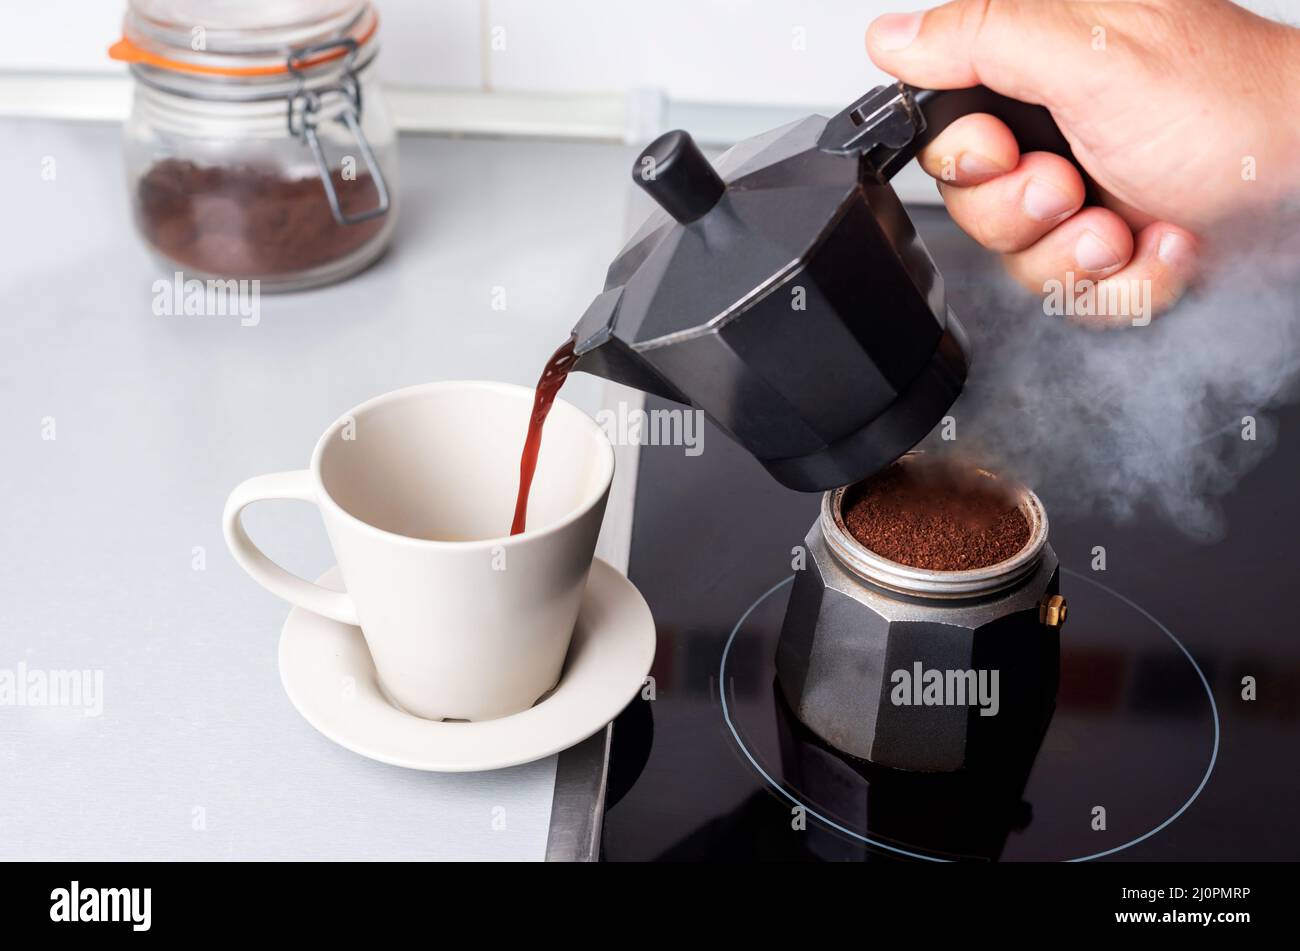 Disassembled coffee maker with one part on the fire and the other serving coffee in a cup. Stock Photo